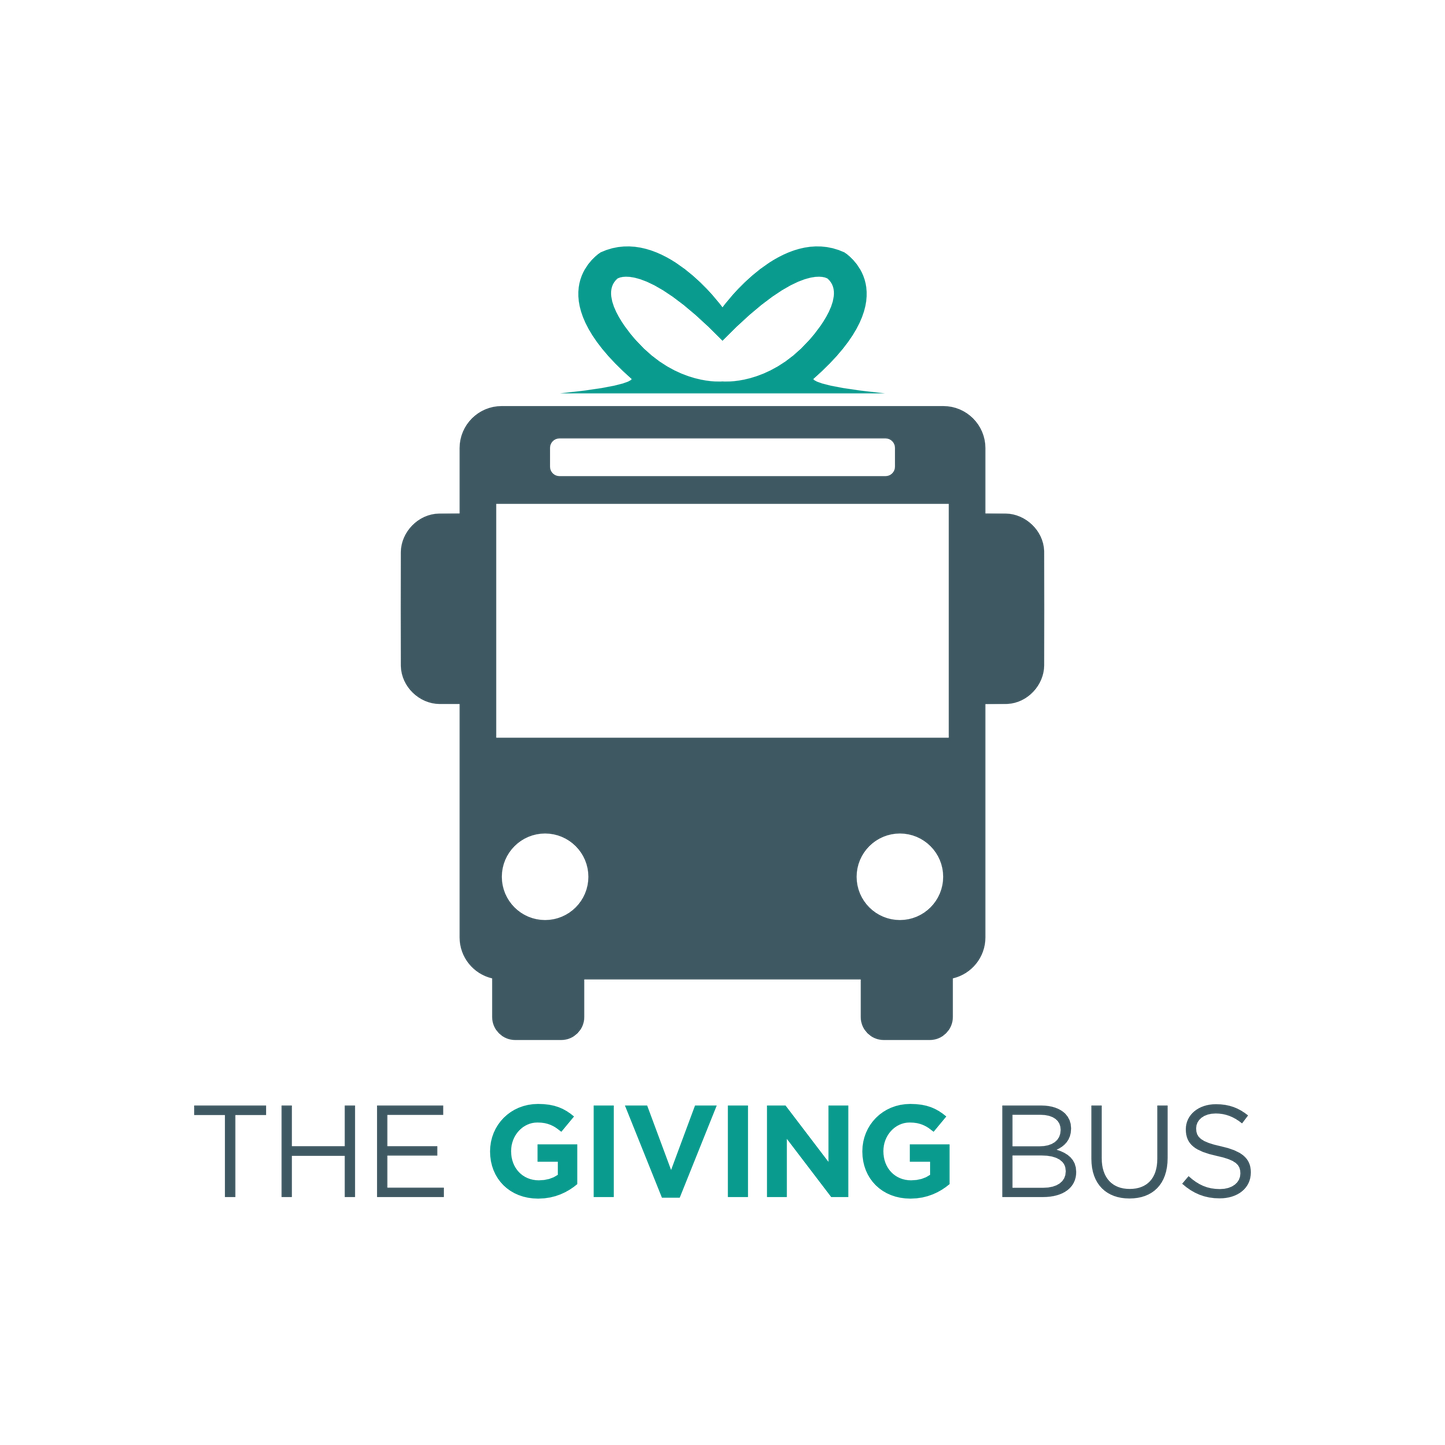 The Giving Bus Community Event